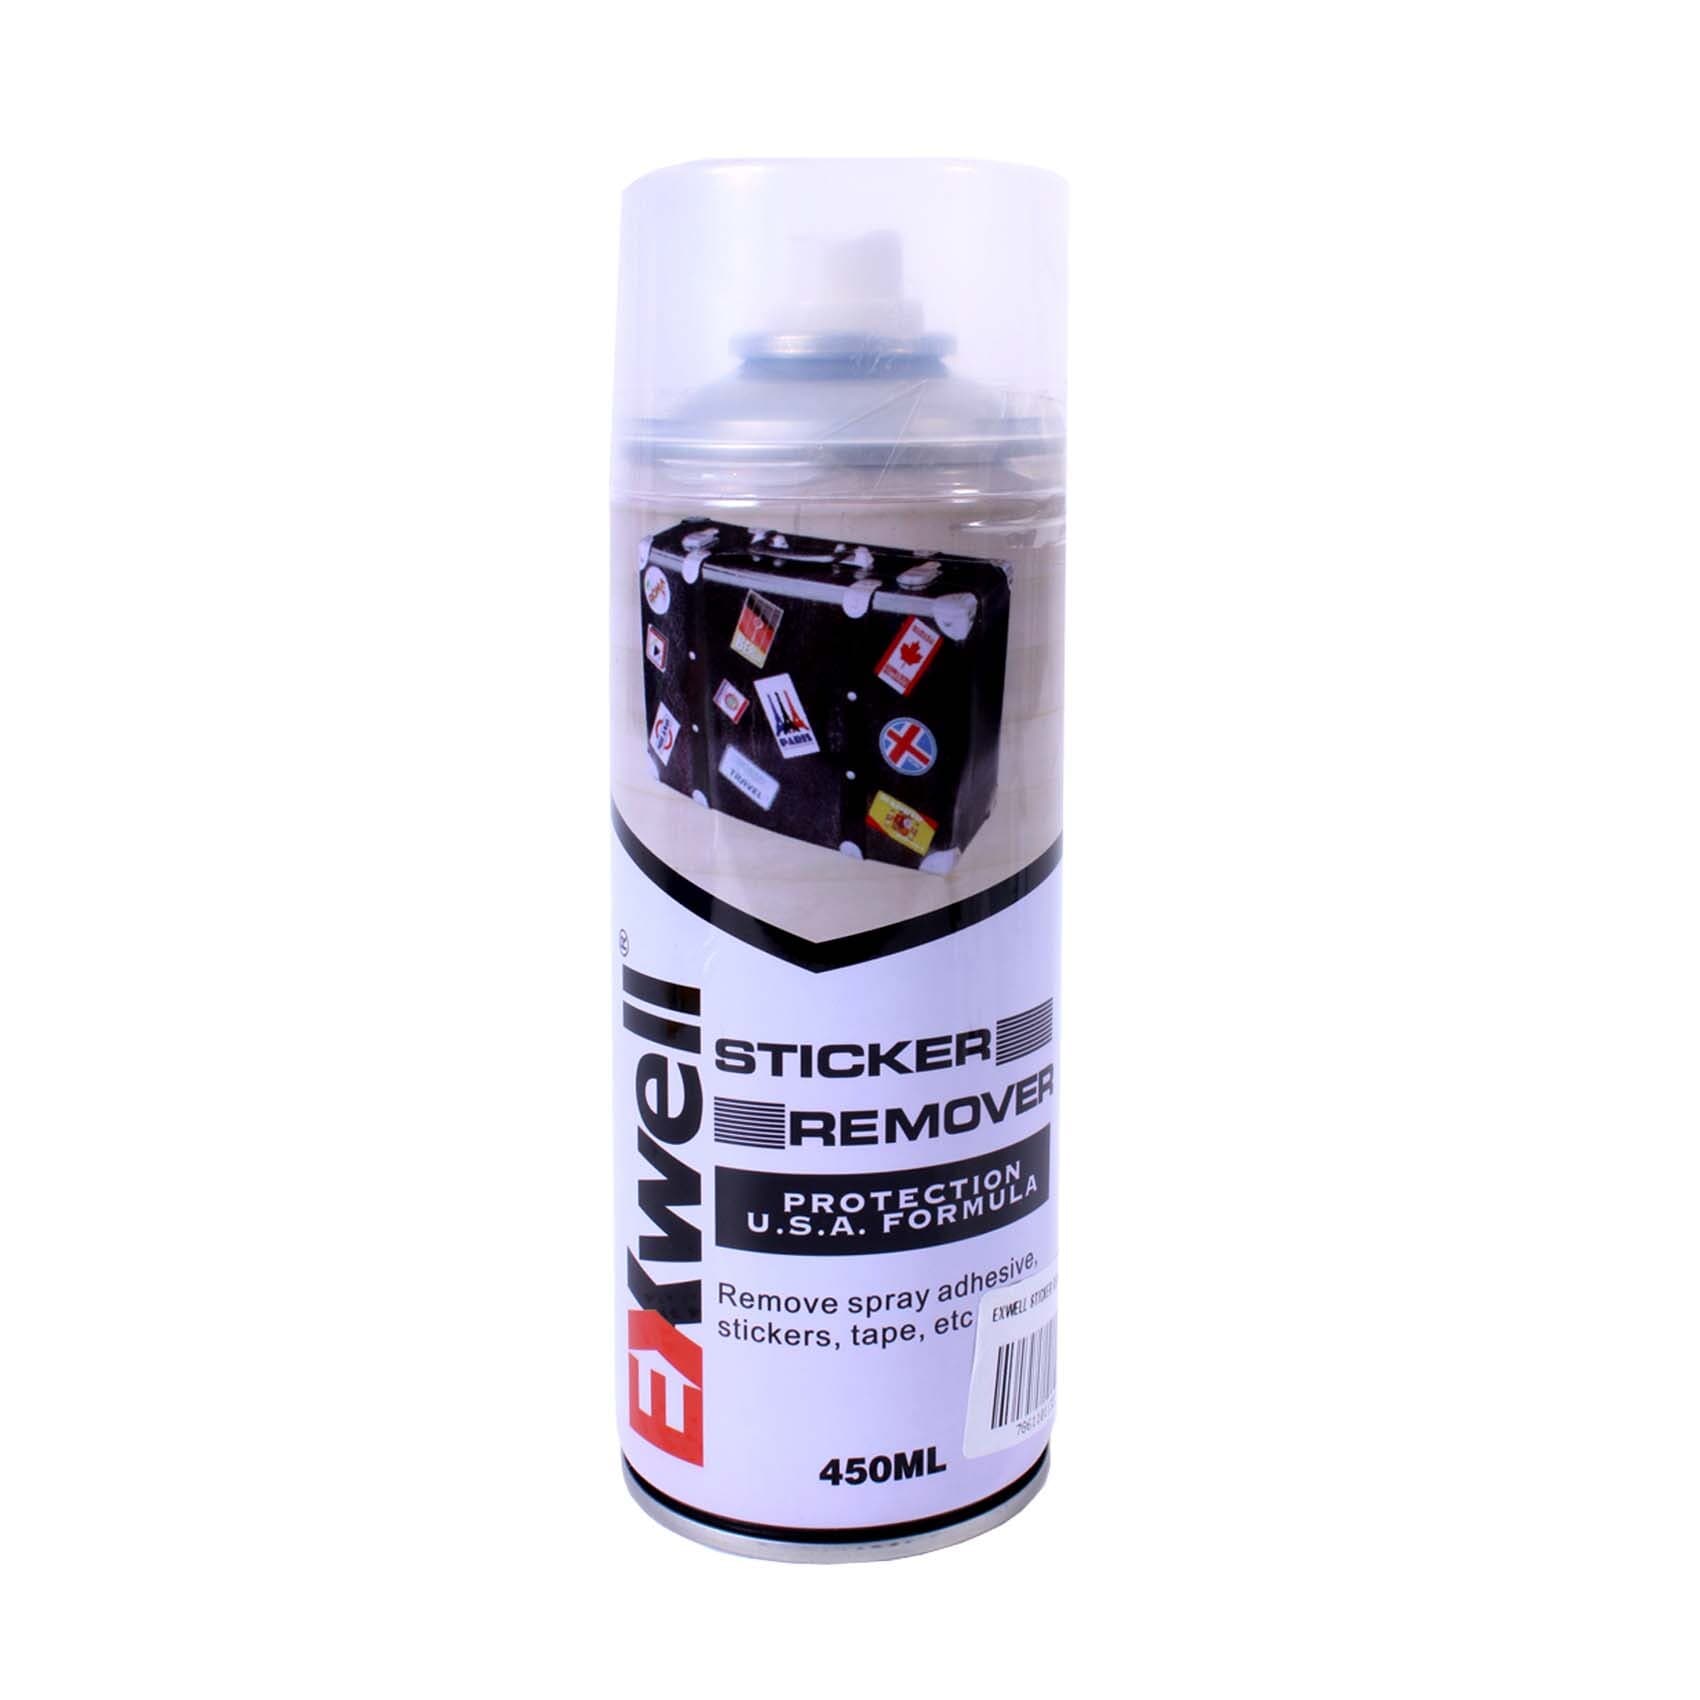 Buy Exwell Sticker Remover Online